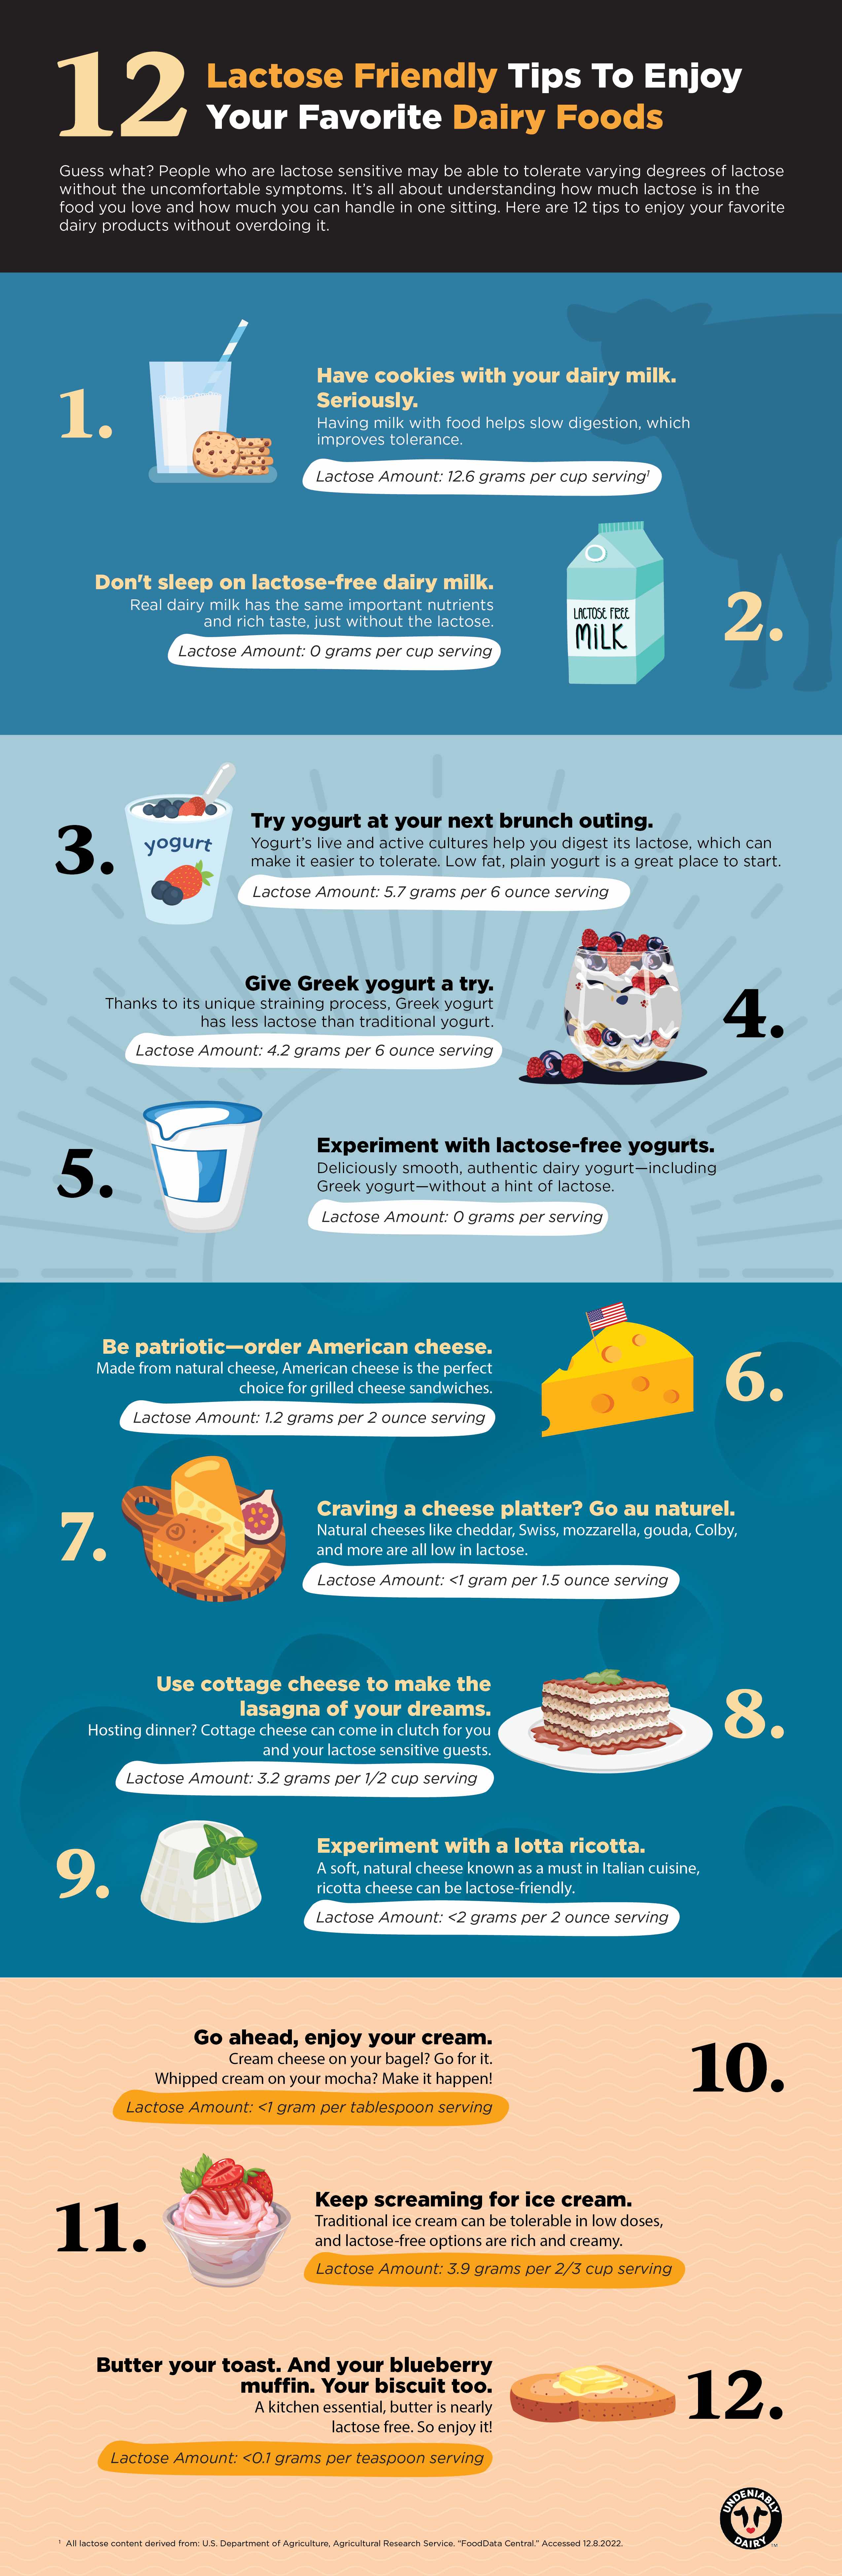 Tips for How to Eat Dairy When Lactose Intolerant U.S. Dairy